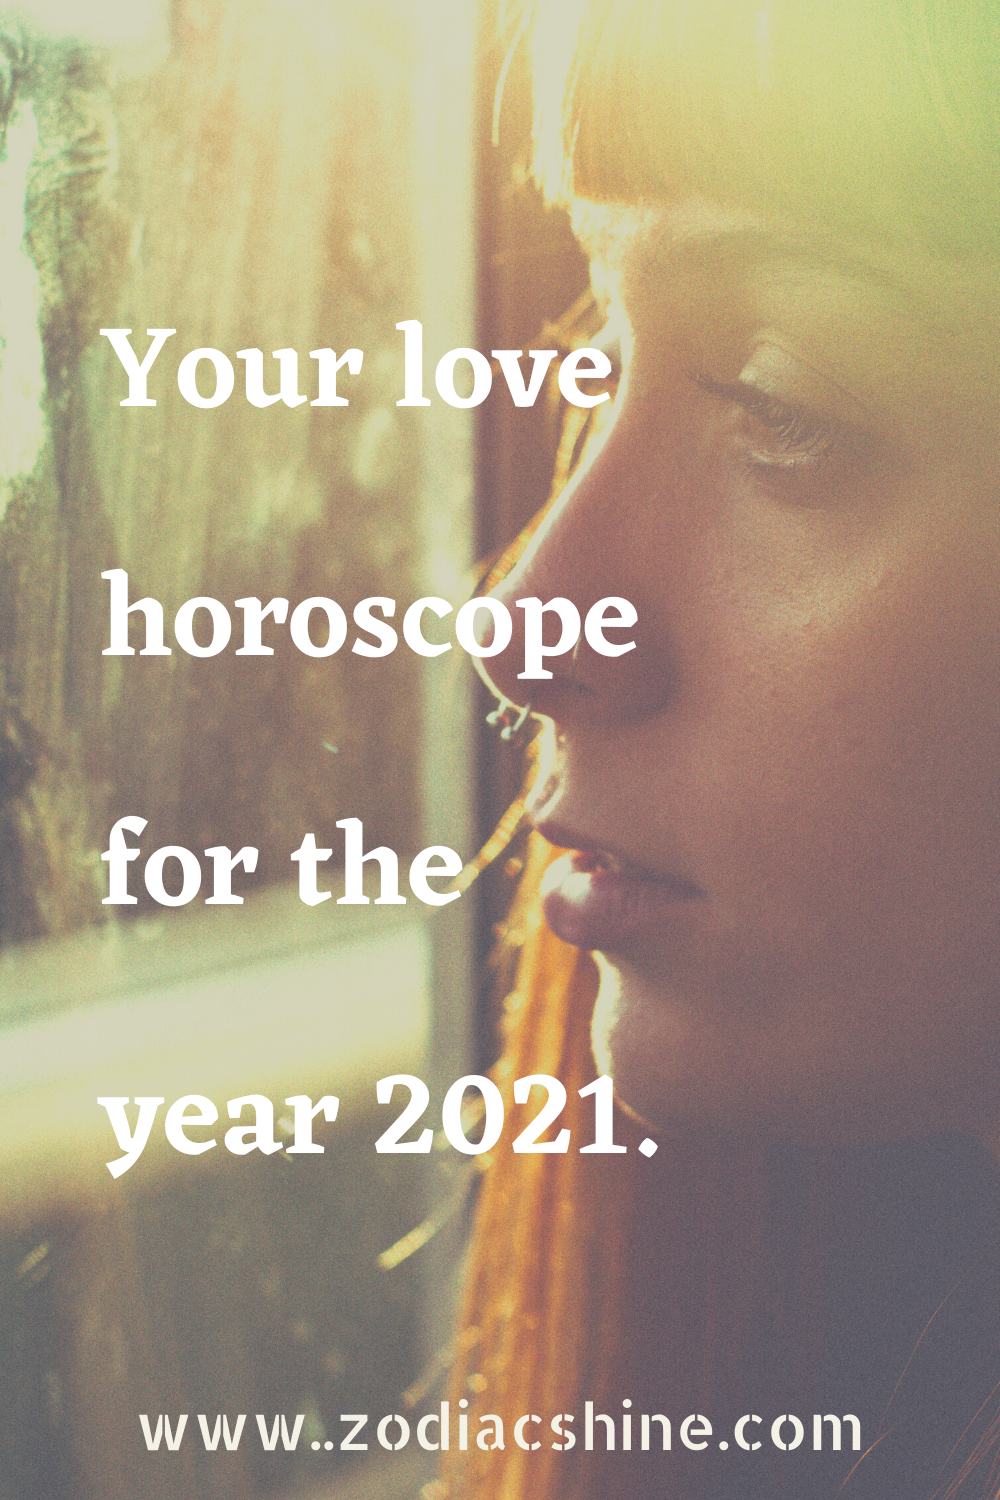 Your love horoscope for the year 2021.